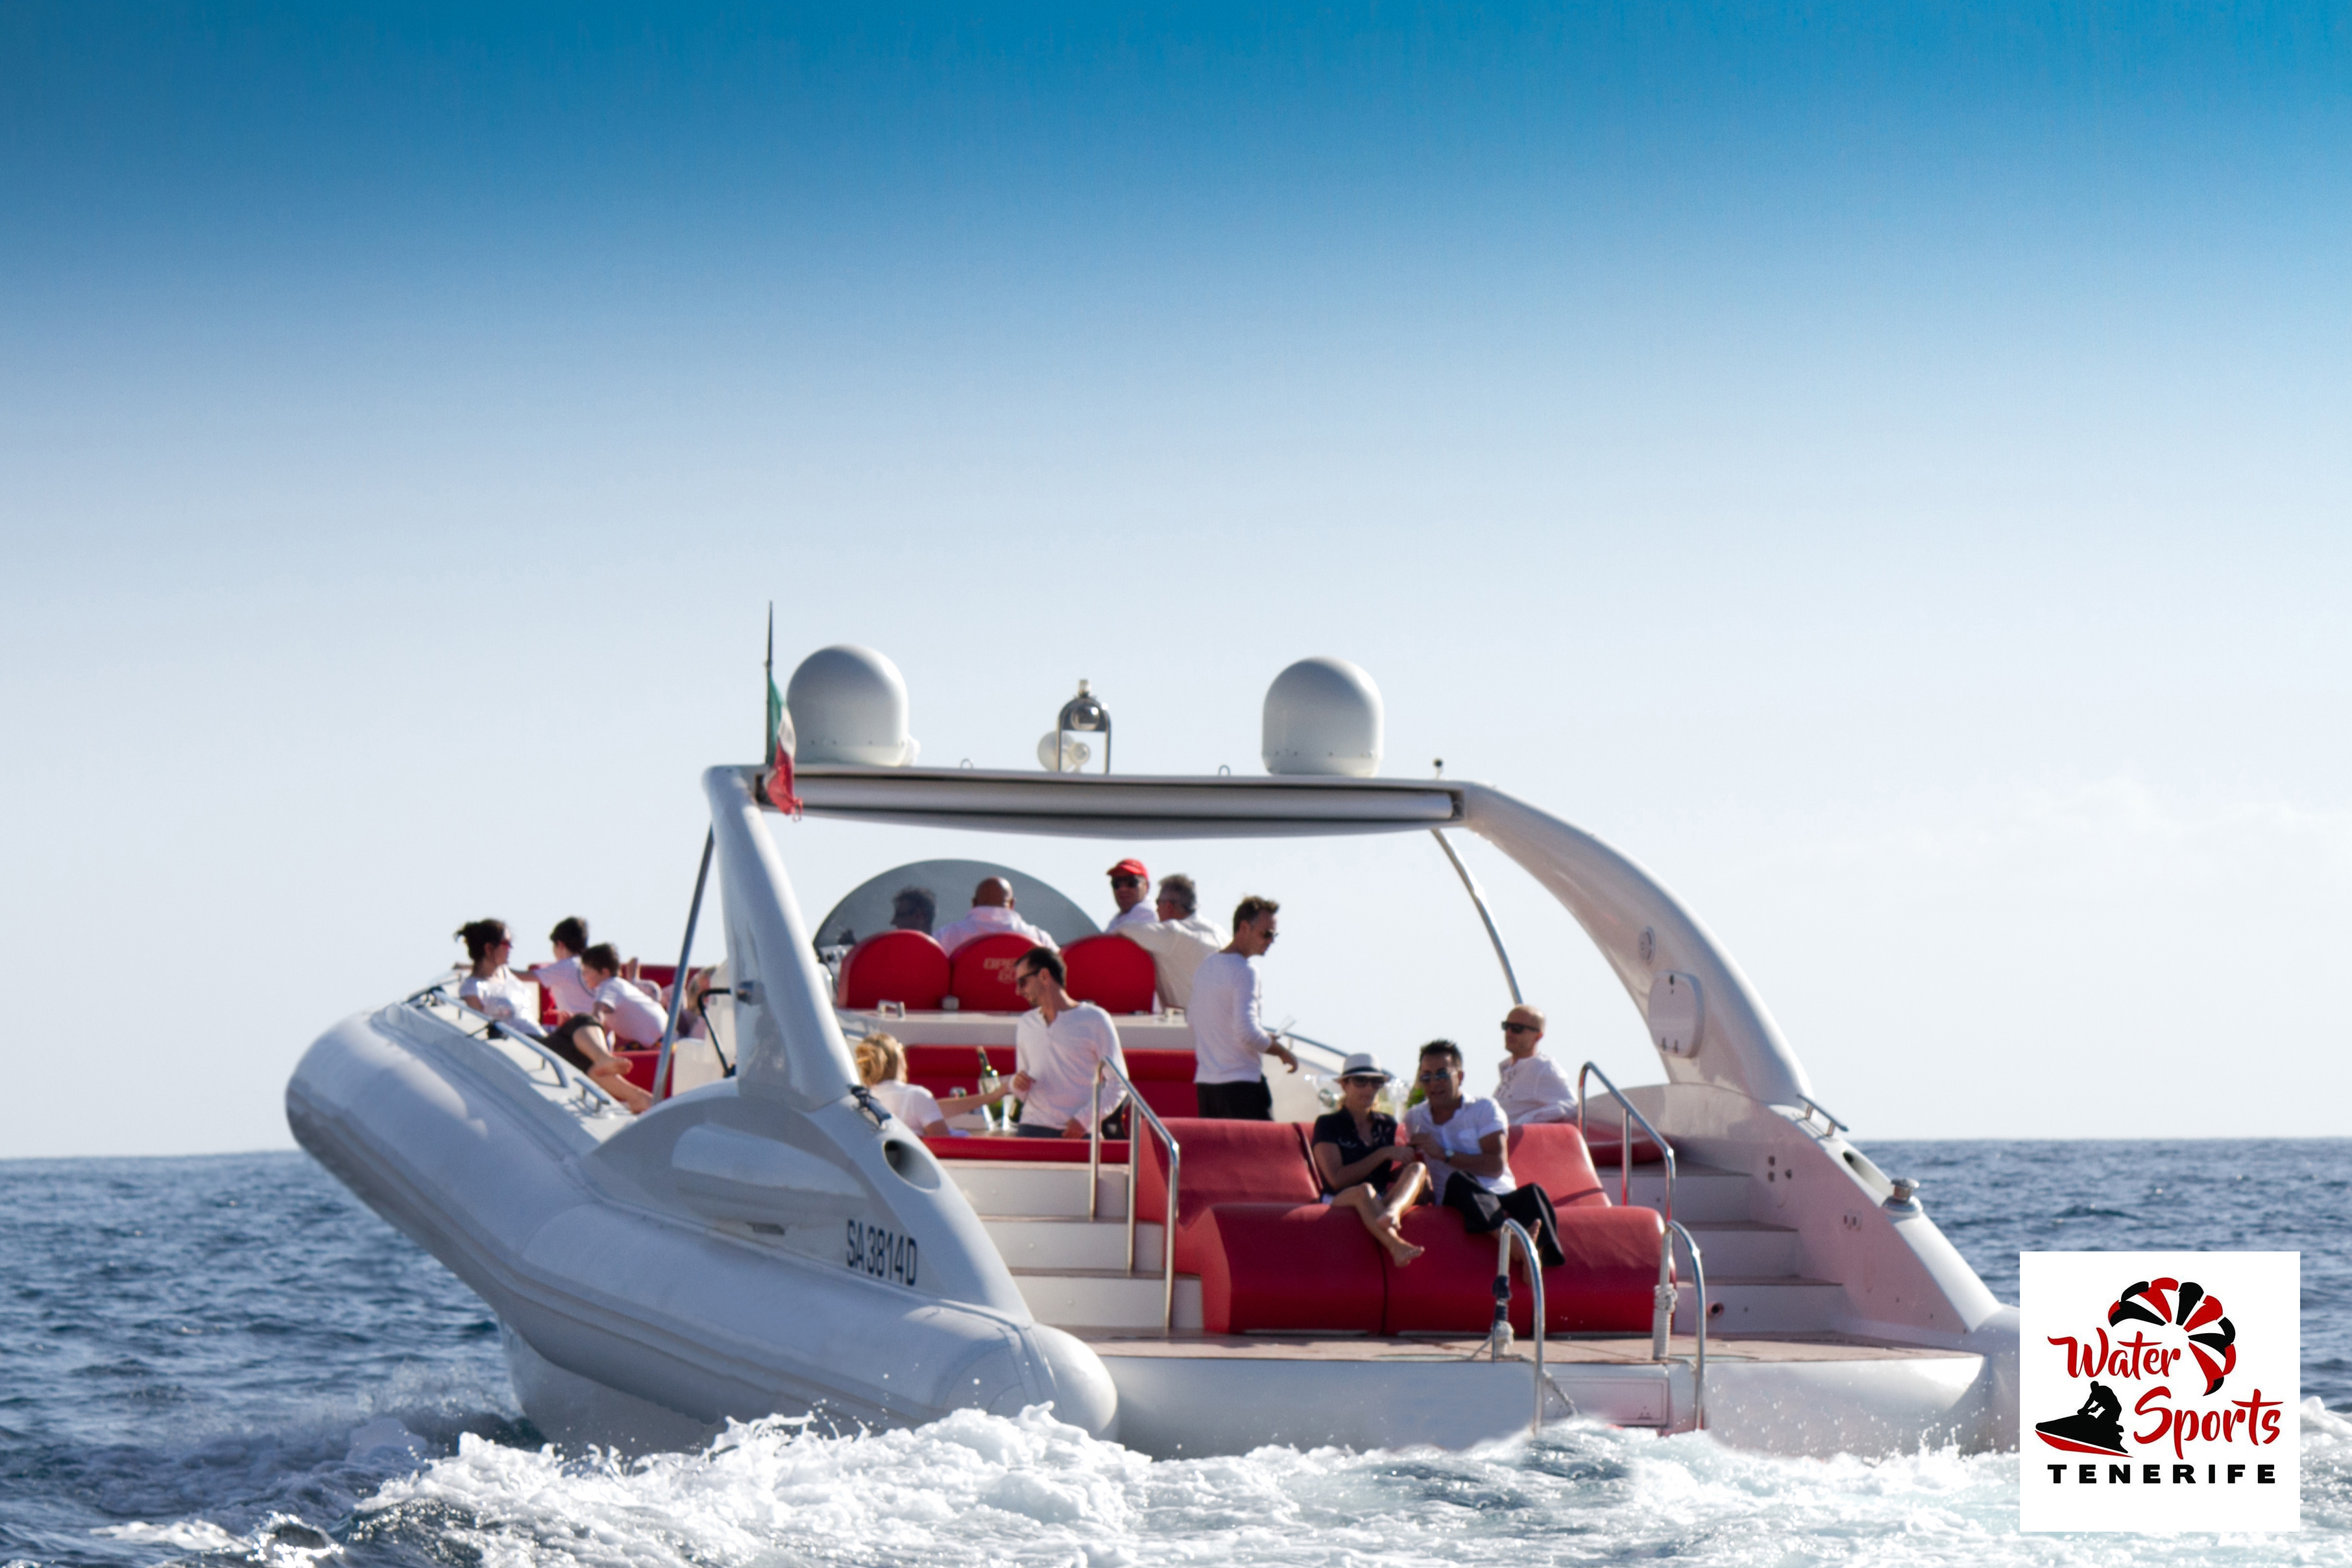 sea riders excursions speedboats in fañabe el medano water sports and activities